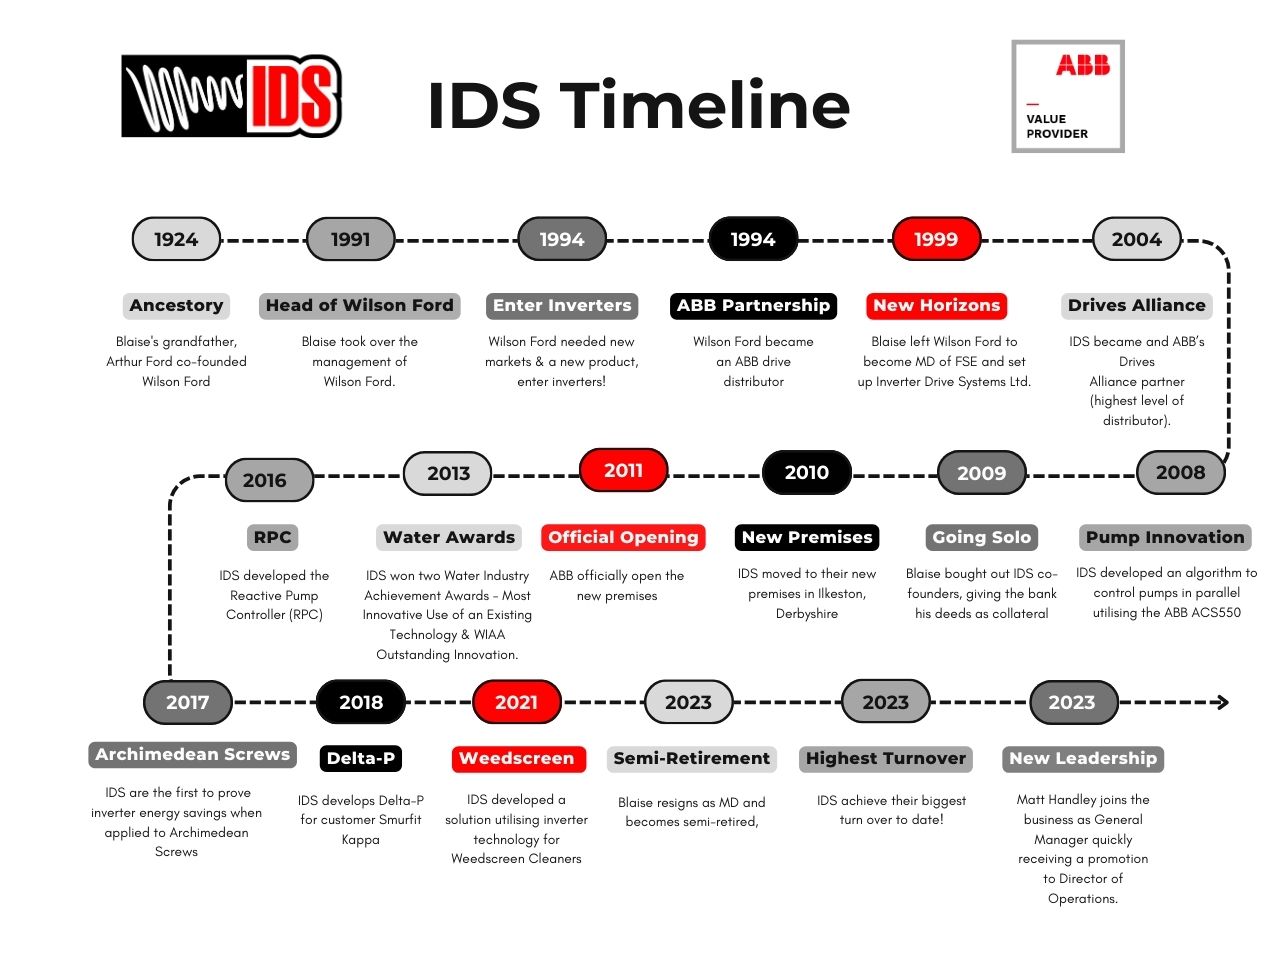 IDS Celebrates 25 Years in Business a timeline of notable achievements over the last 25 years, detailed in the blog